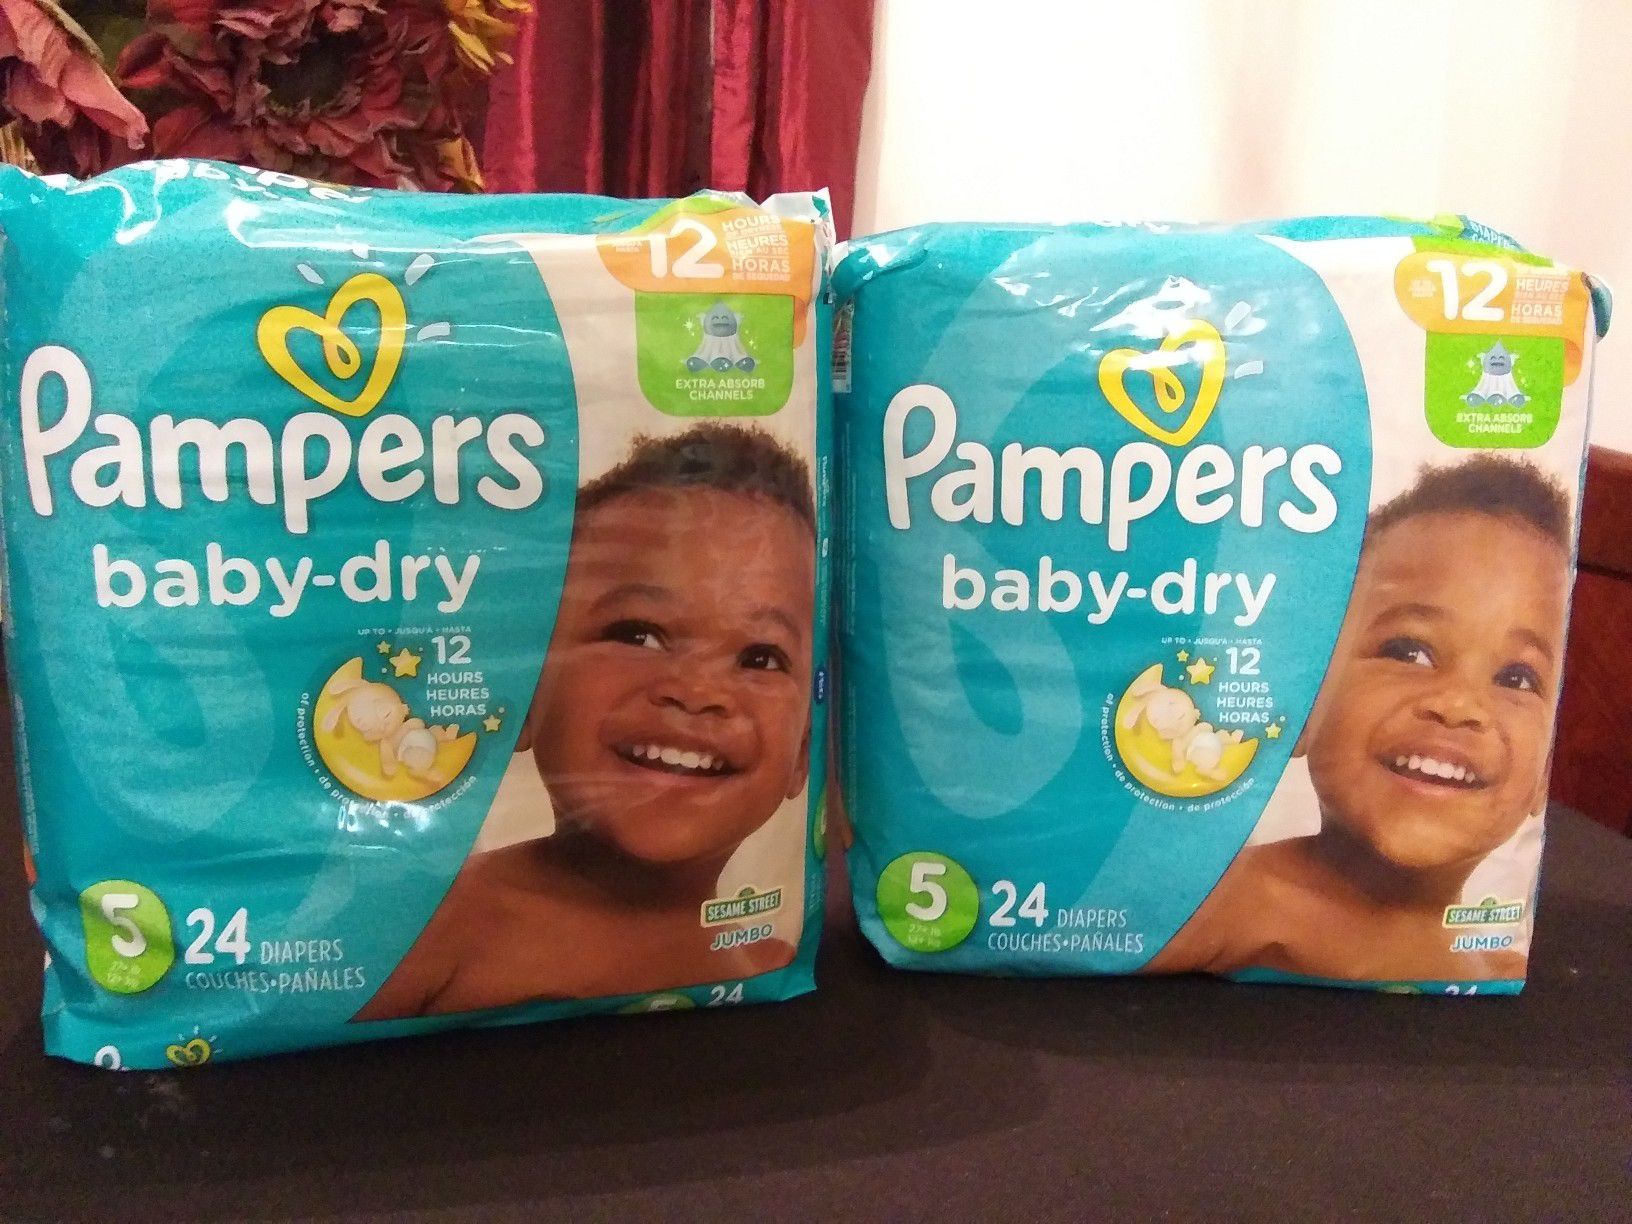 Pampers size 5